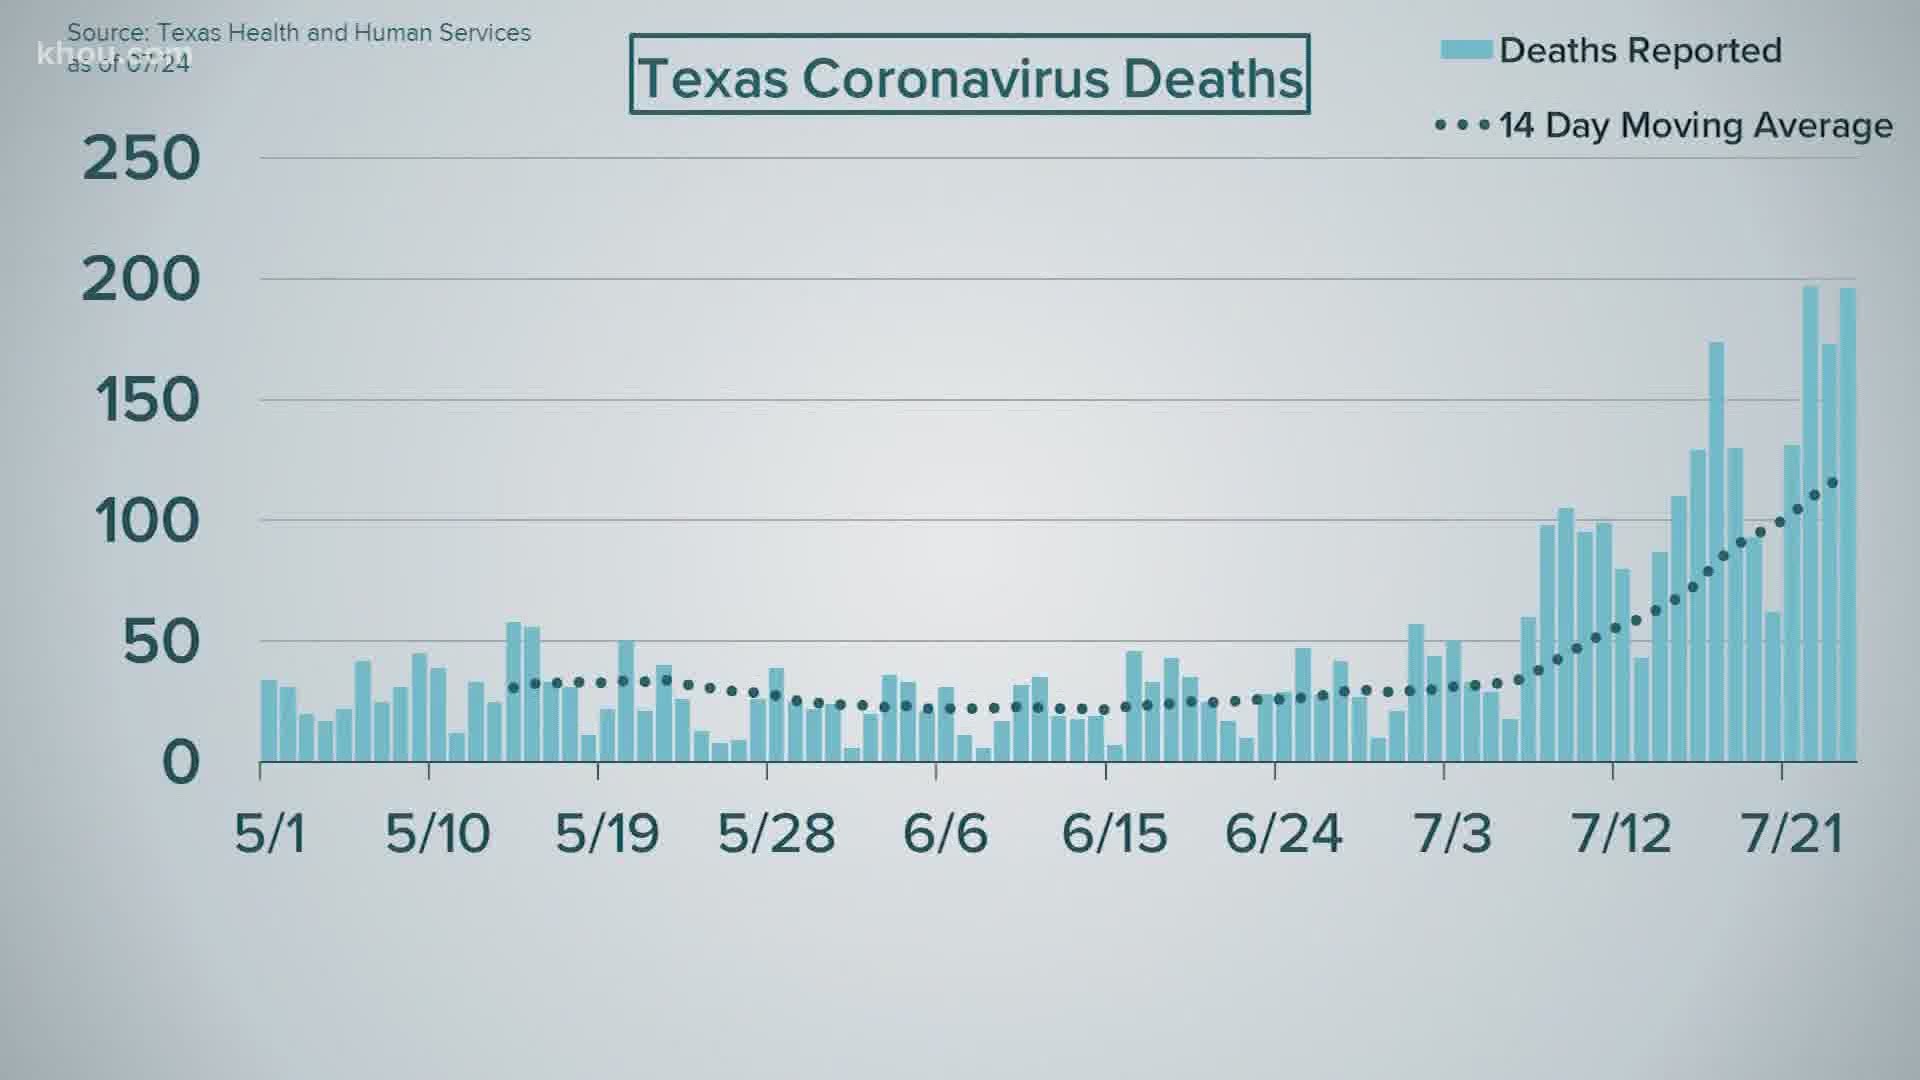 Texas' Department of State Health Services reported 196 new COVID-19 deaths and 8,701 new cases on Friday.